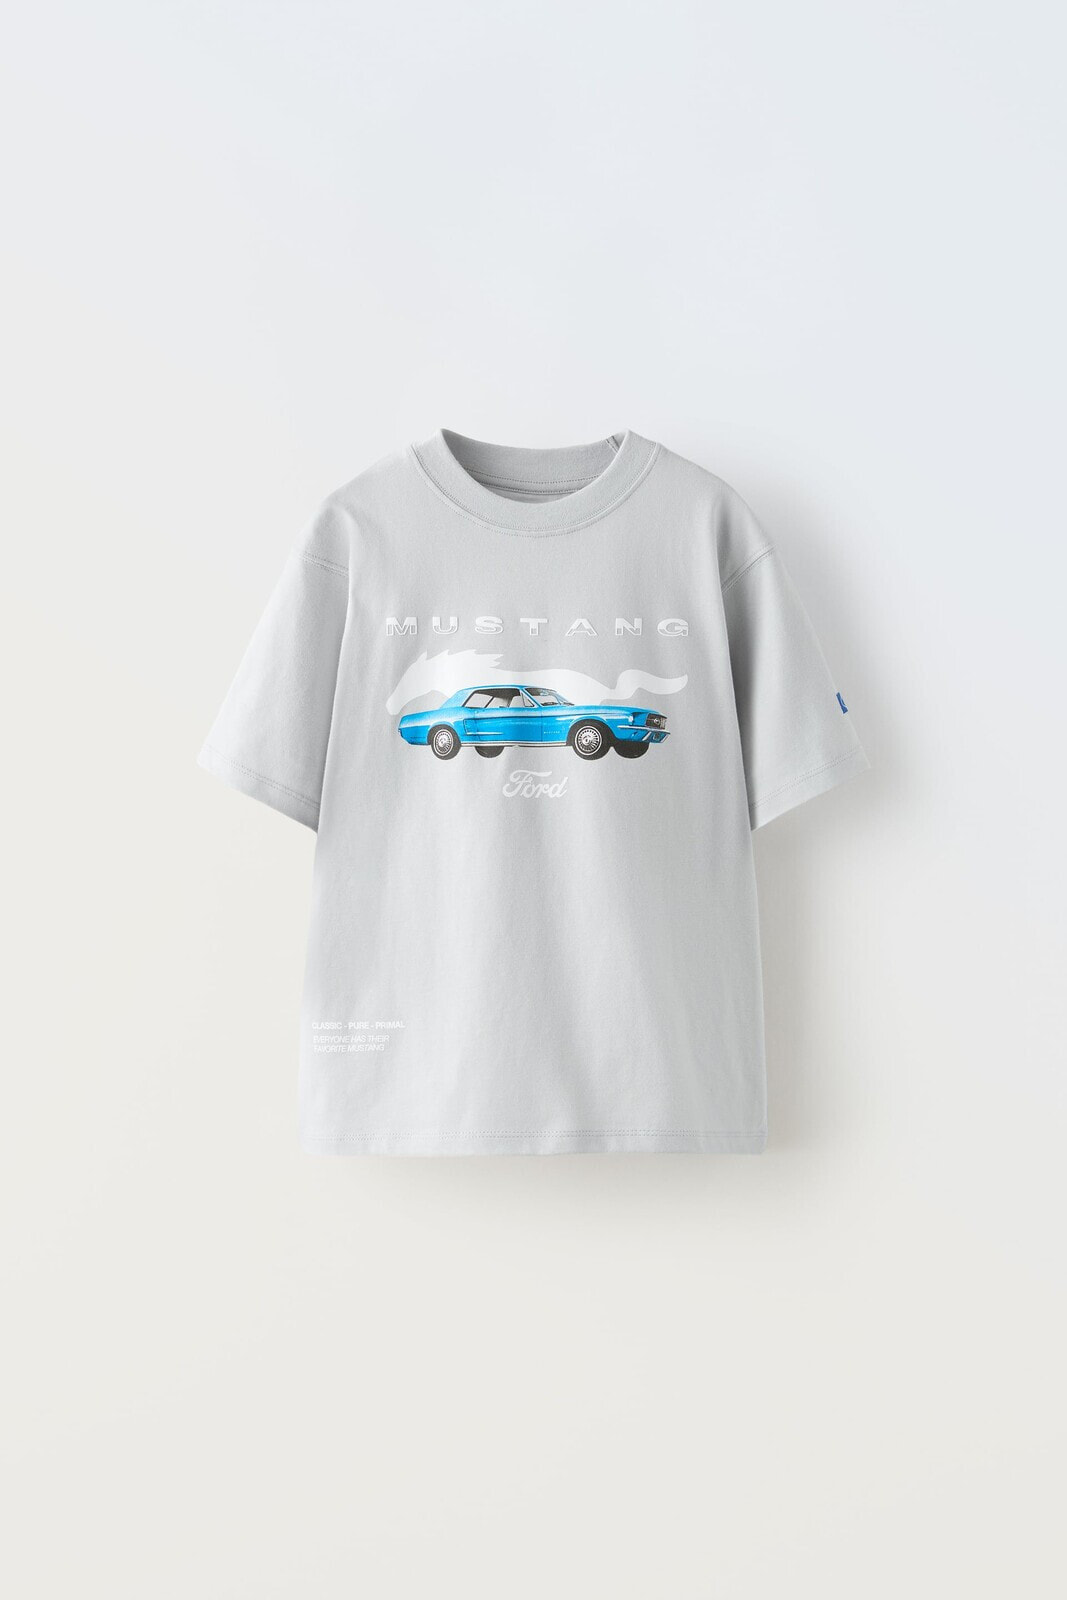 Ford mustang © t-shirt